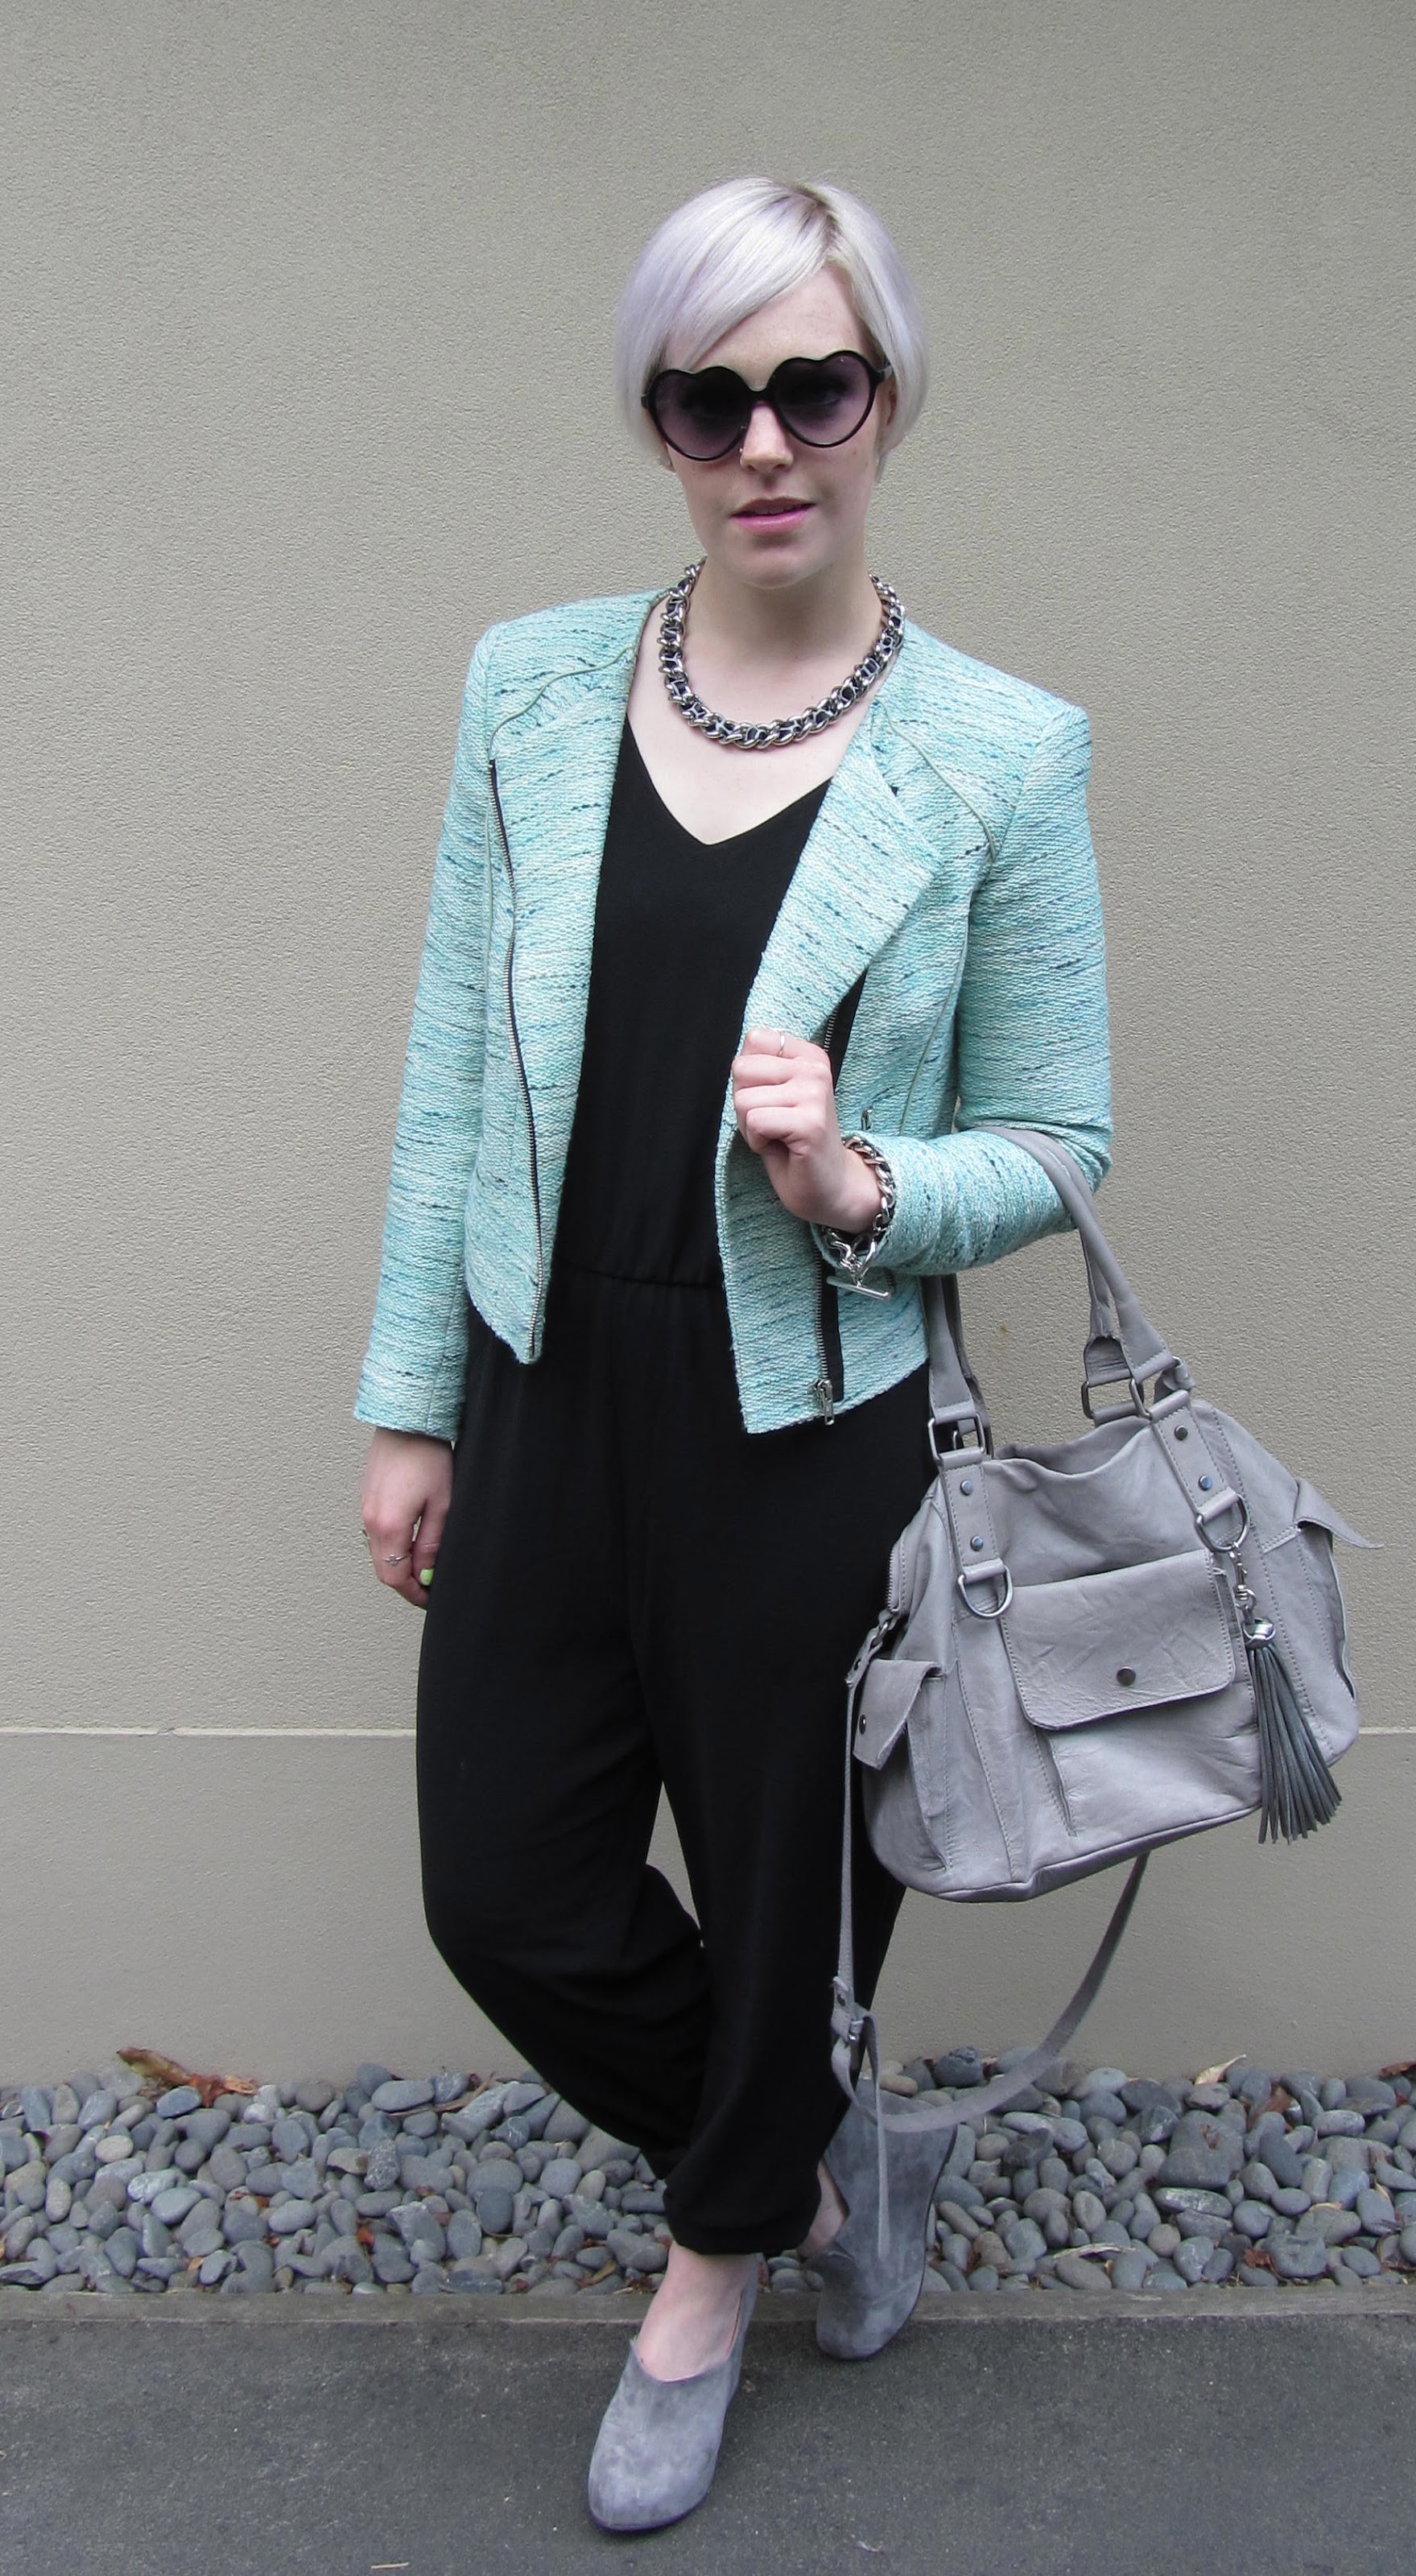 OOTD: pastel pieces. - the photo phobic